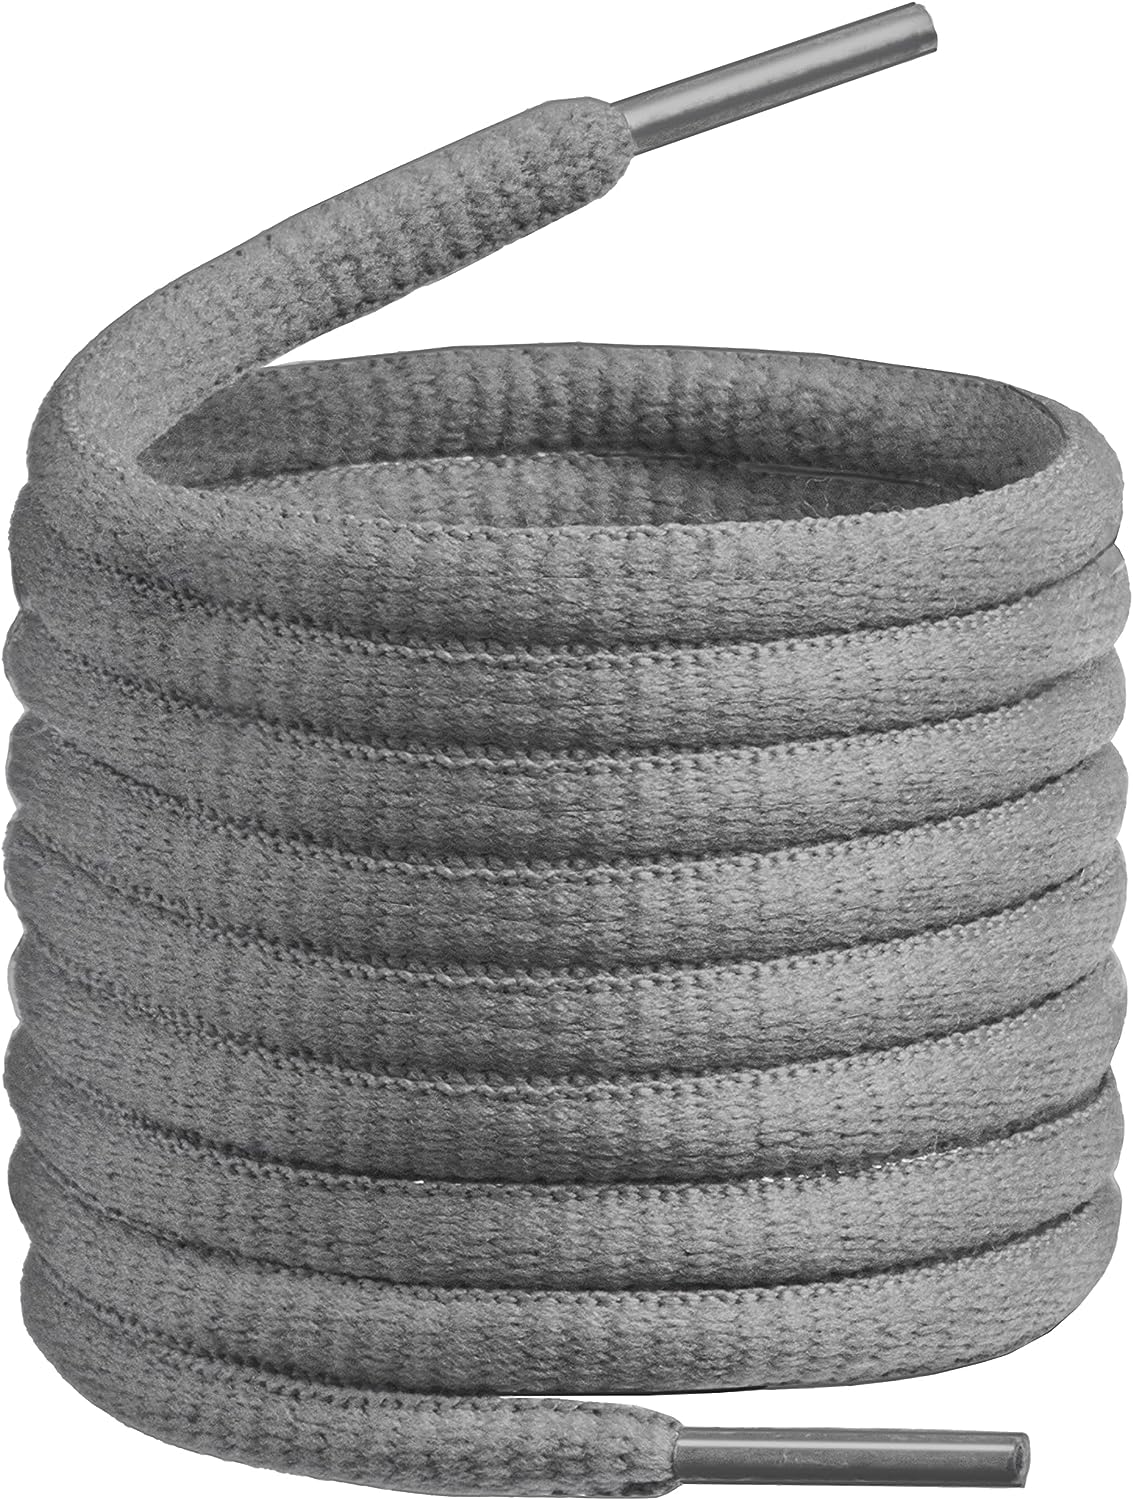 BIRCH's Oval Shoelaces 27 Colors Half Round 1/4